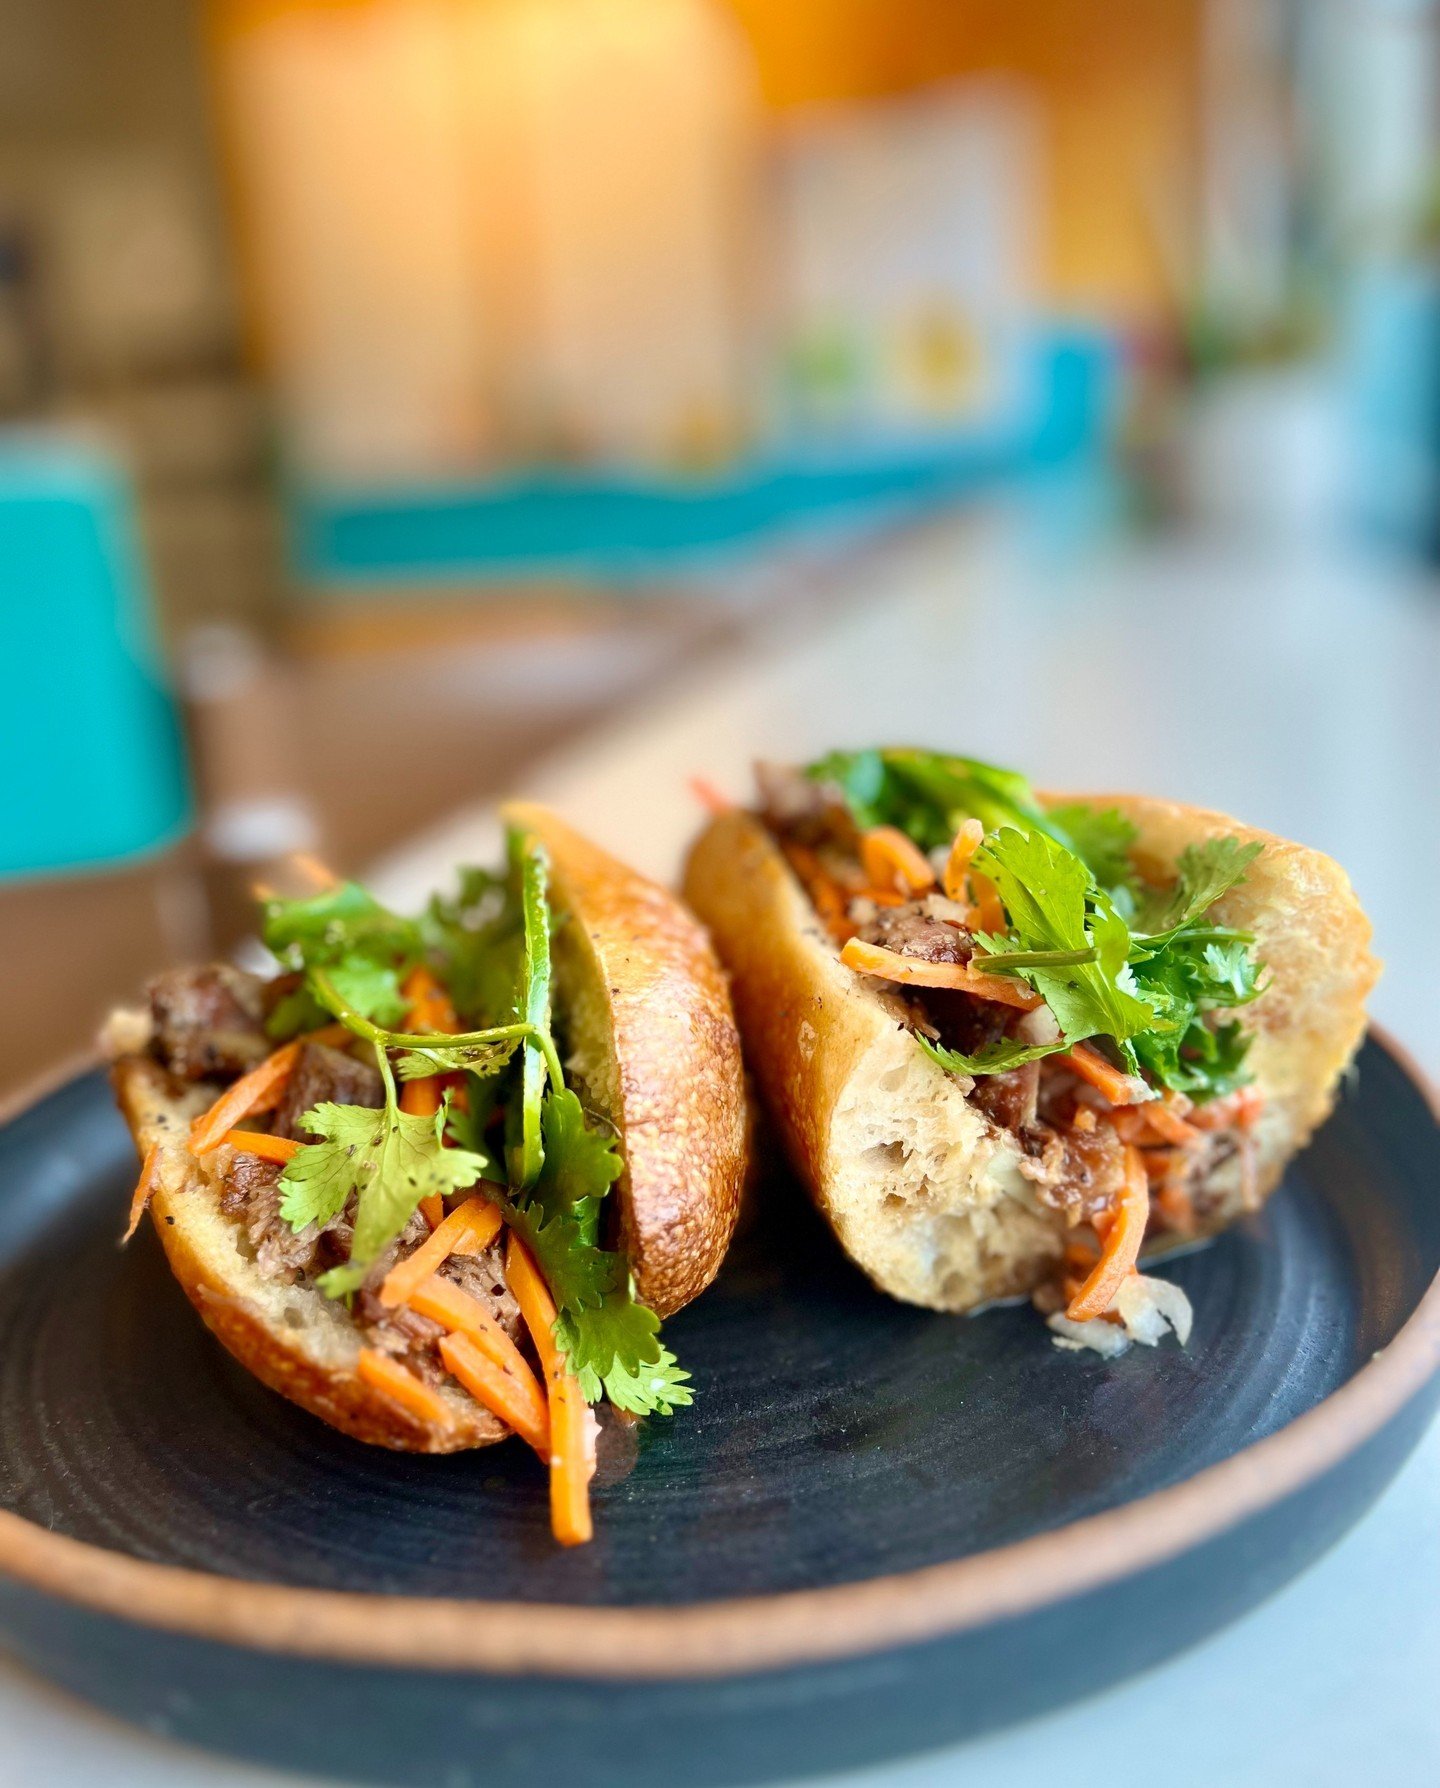 You need a Banh Mi today...we can feel it!
Delivery with @ubereats at the Link in Bio!!